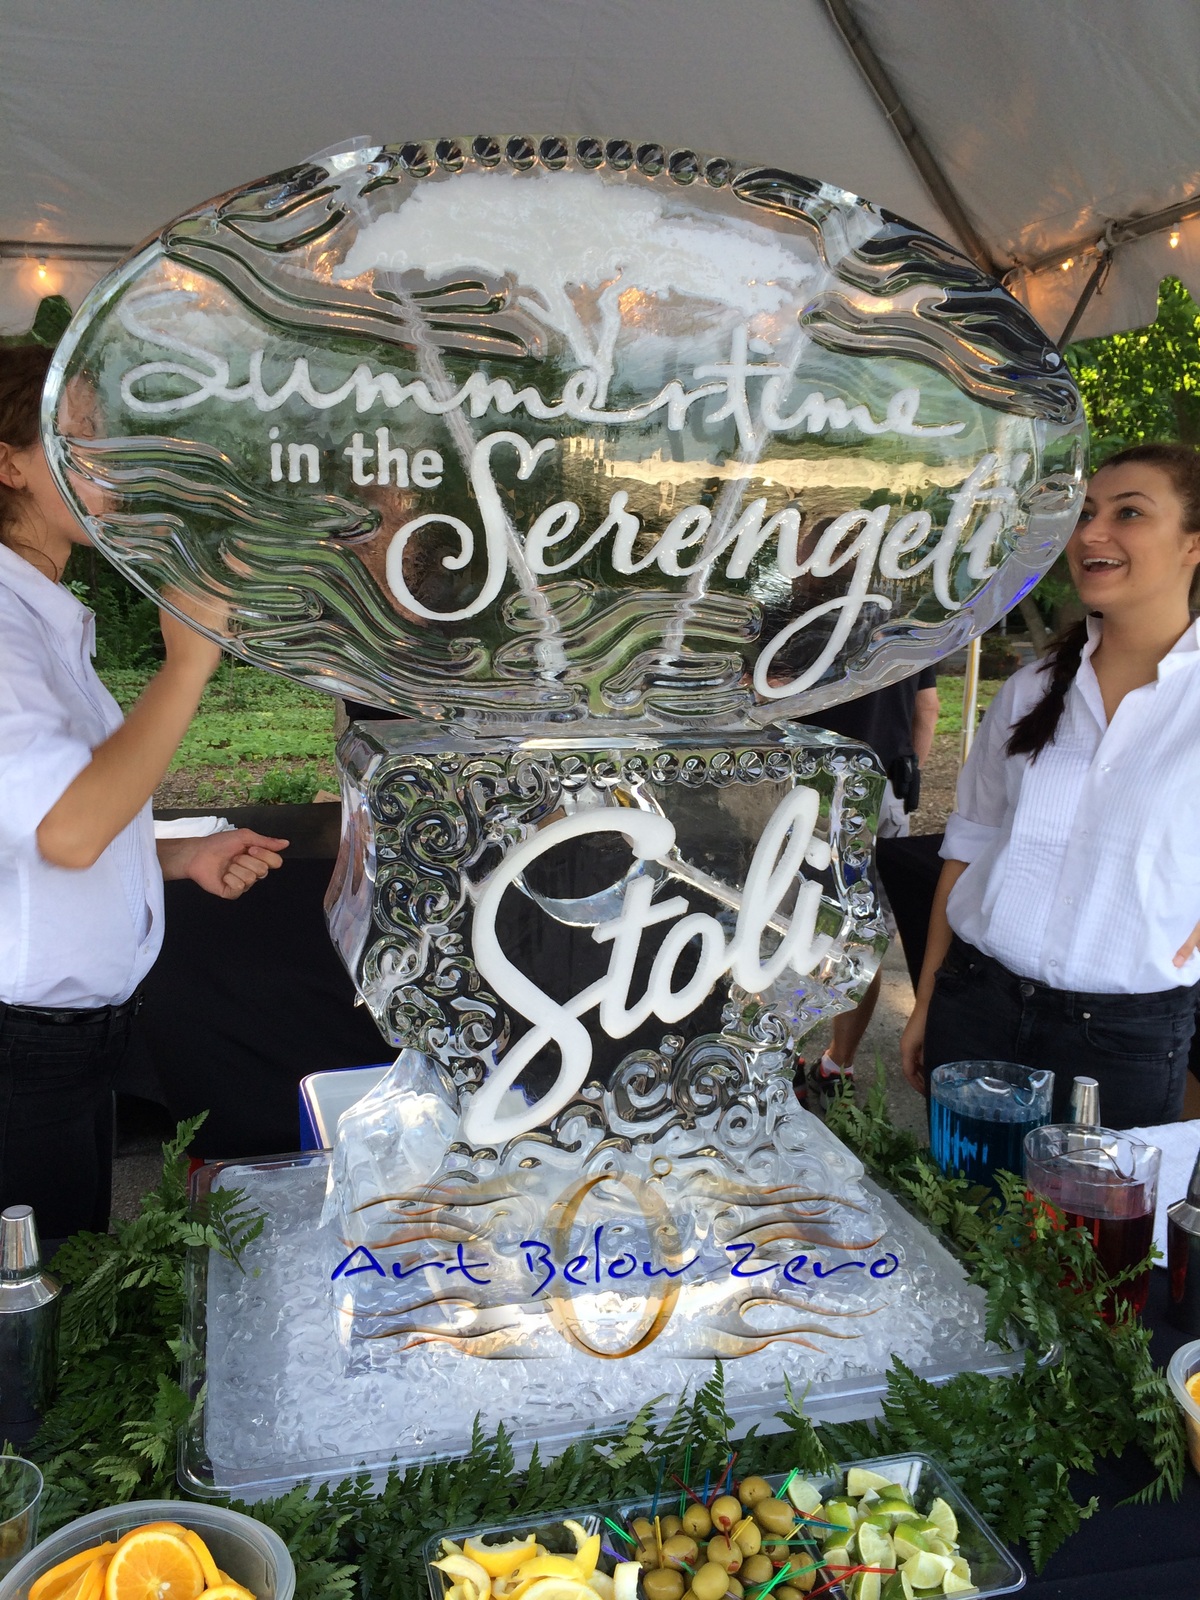 Summertime_in_the_serengeti_double_martini_luge_ice_sculpture